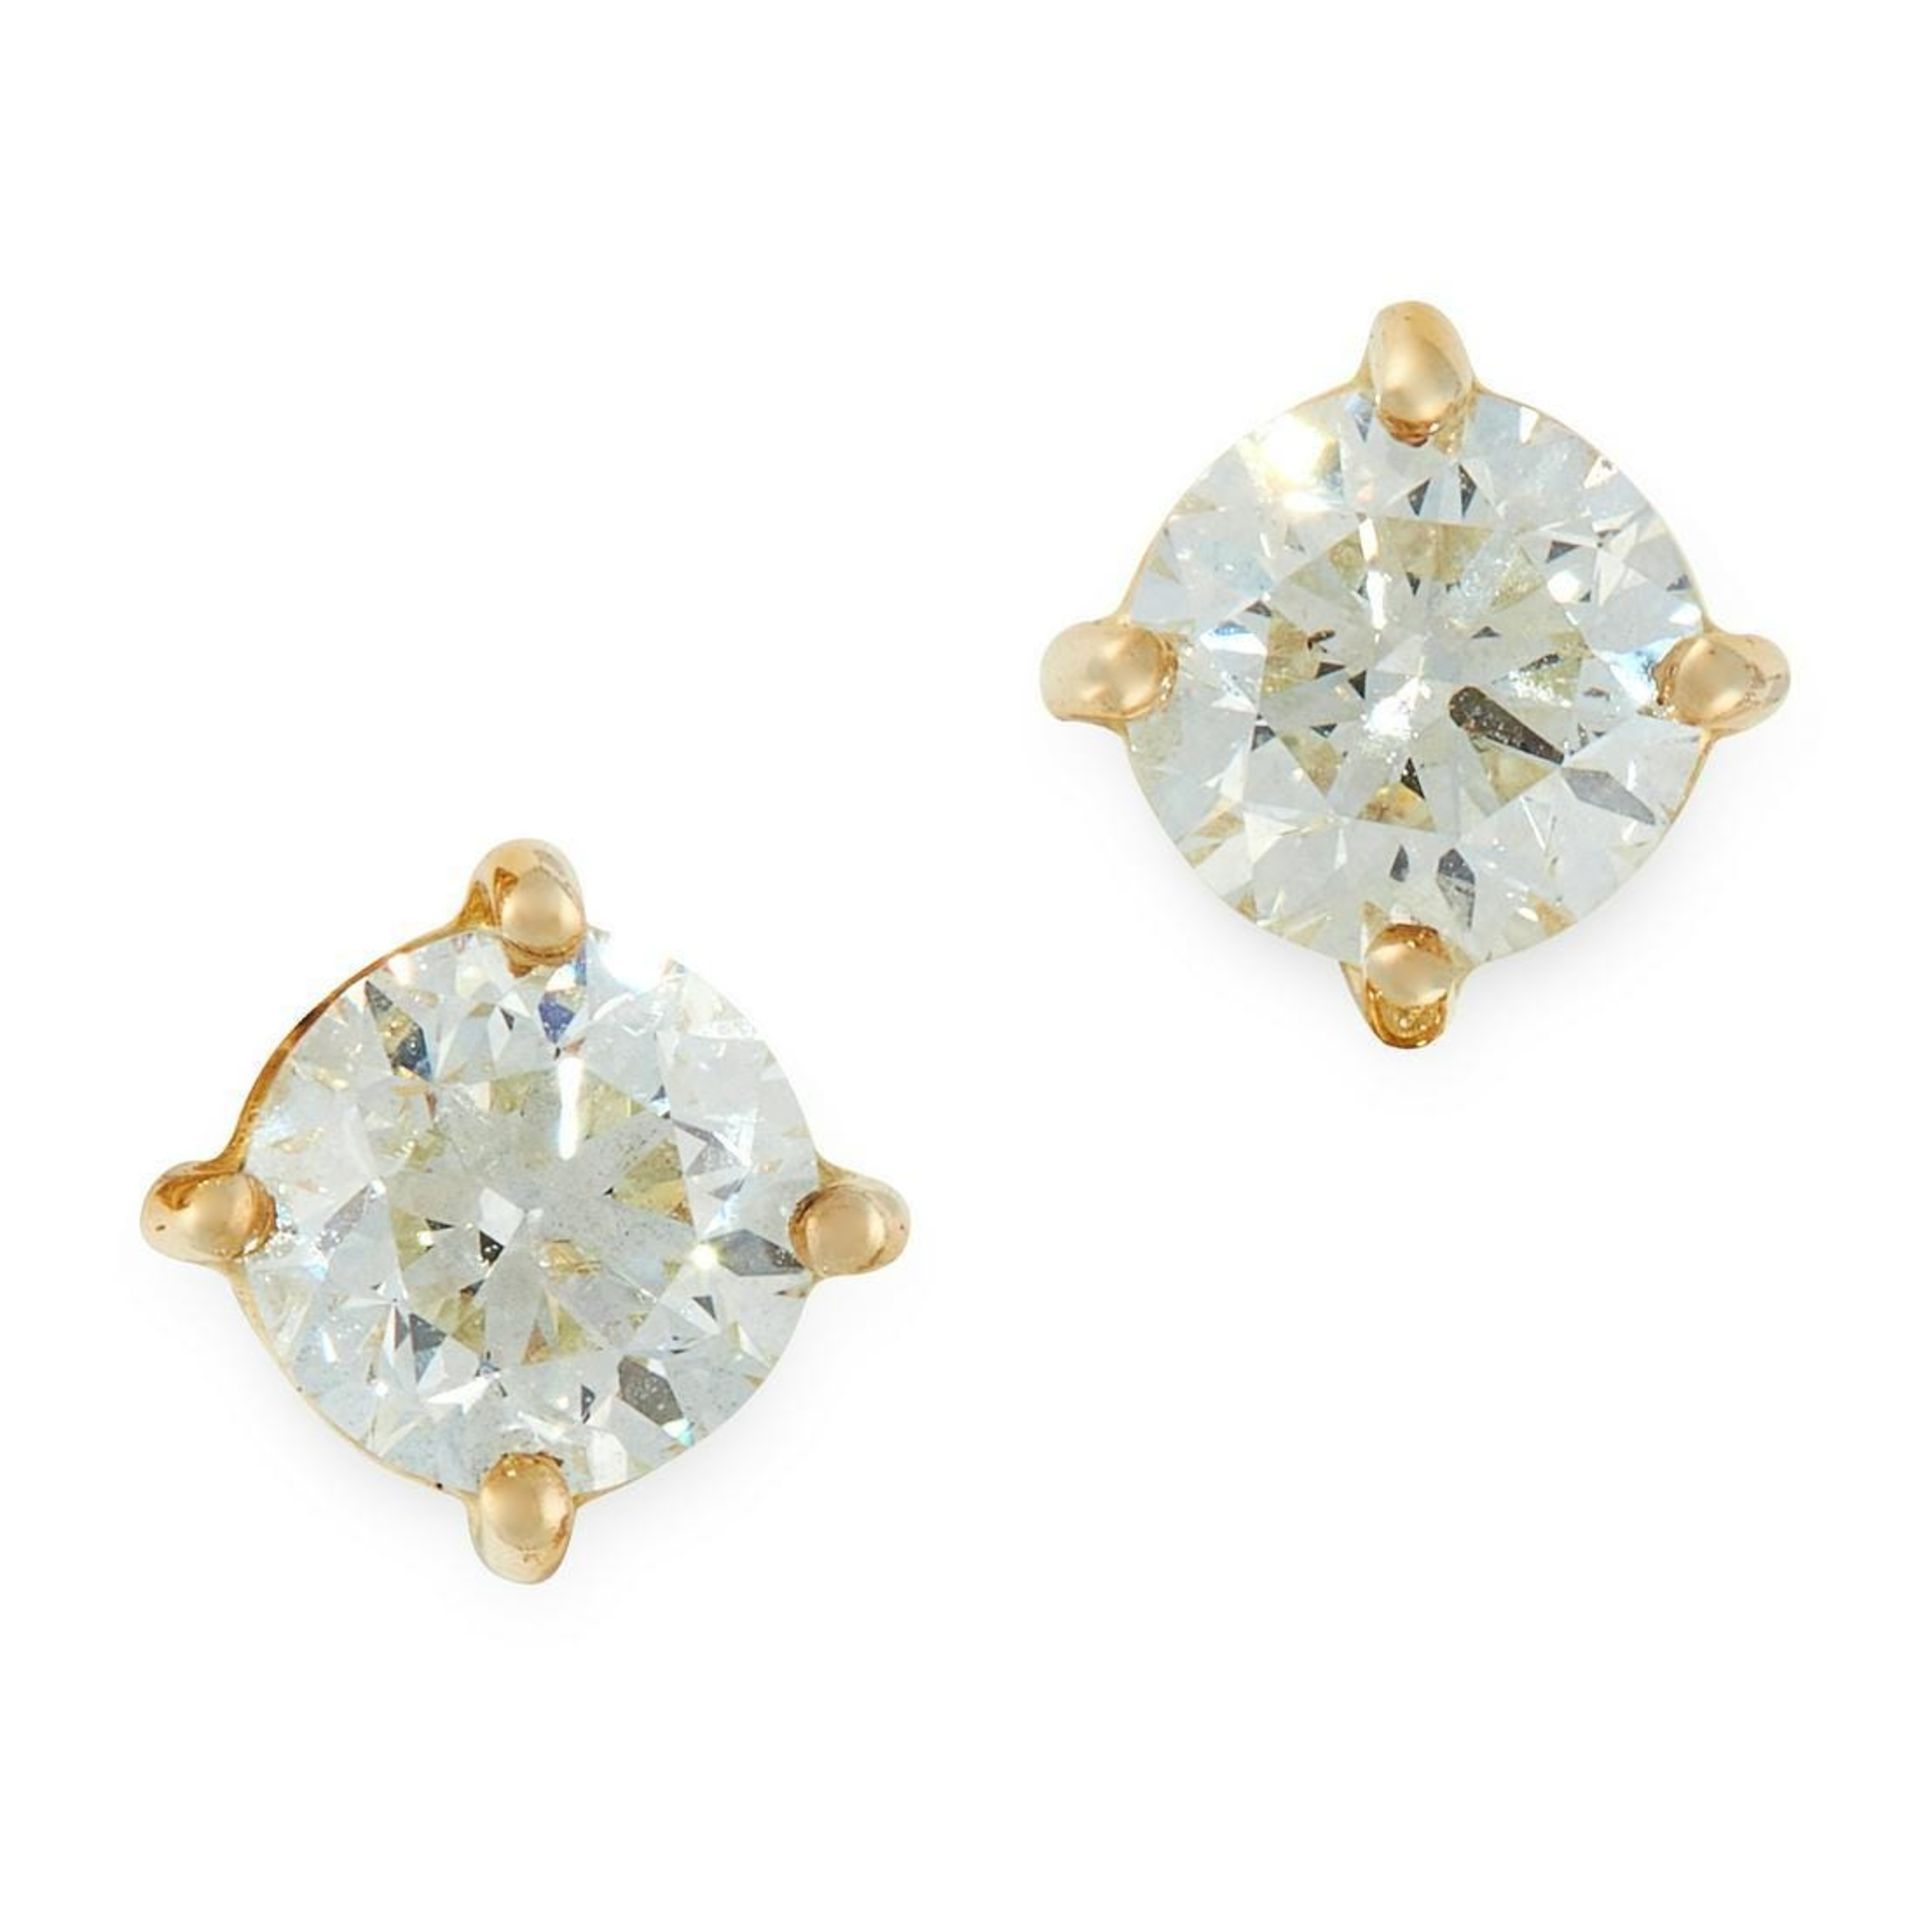 PAIR OF DIAMOND STUD EARRINGS each set with a round cut diamond, both totalling 1.01 carats, stamped